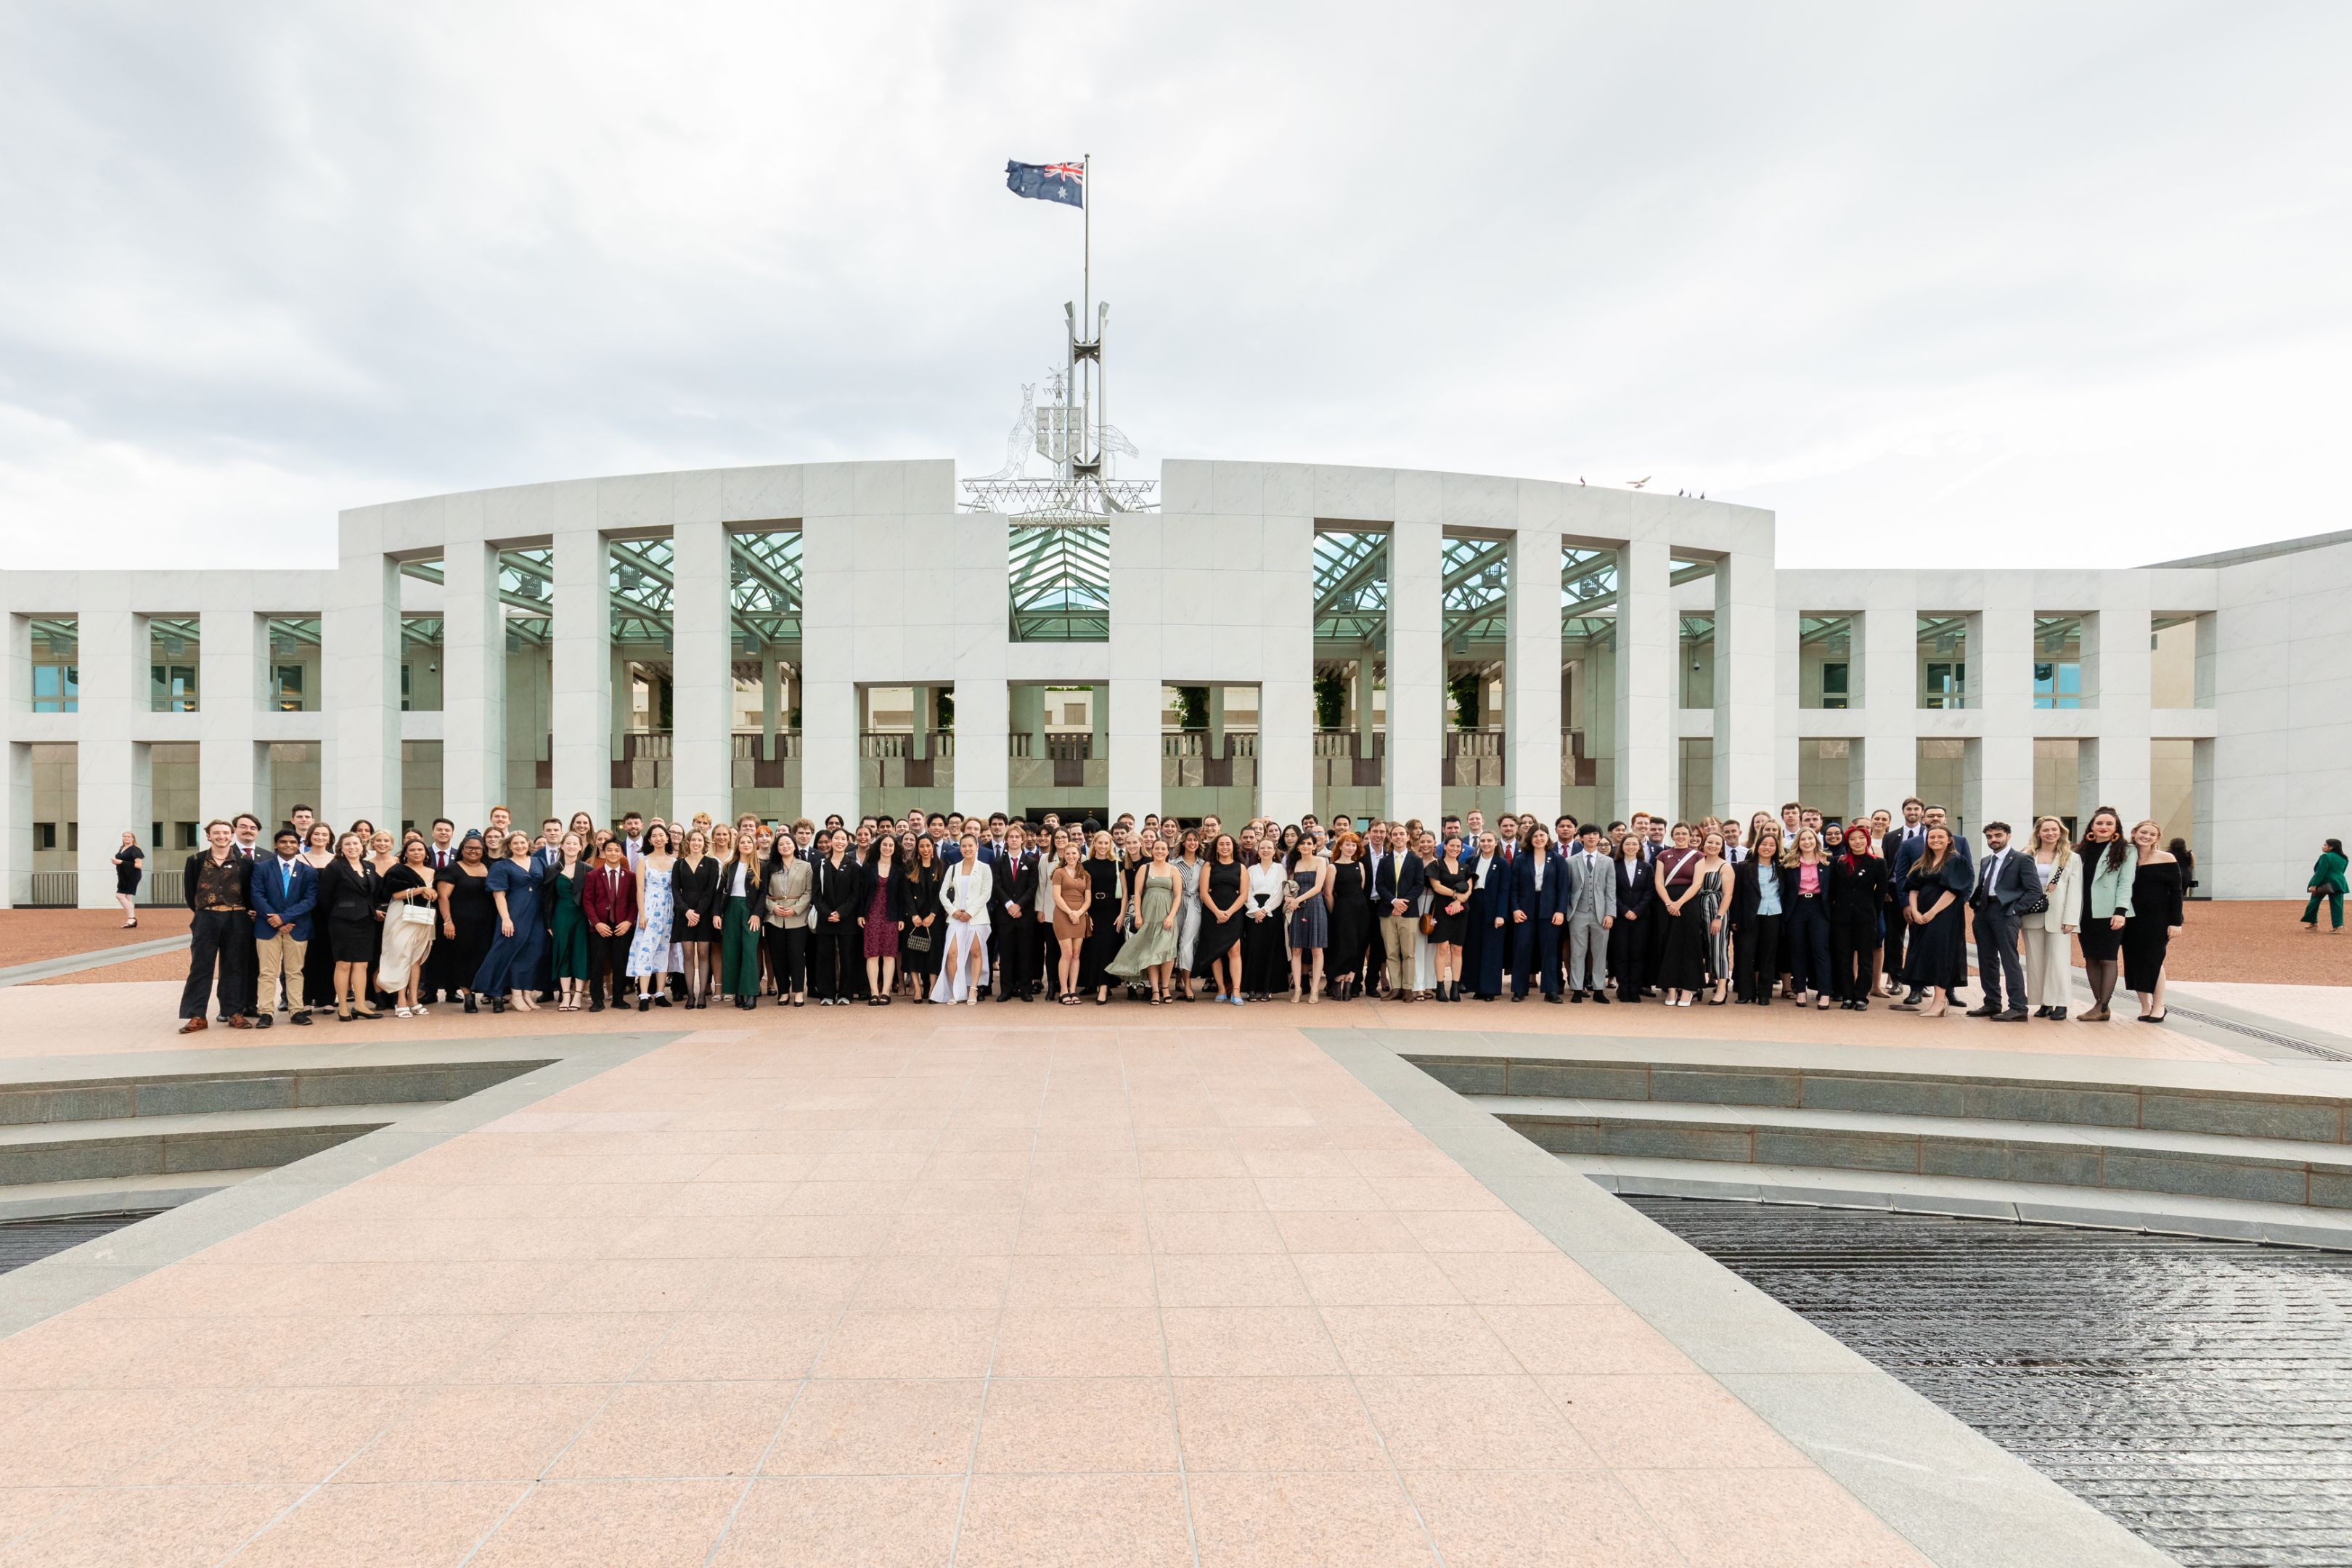 Recipients of the New Colombo Plan at the Australian Parliament House in Canberra